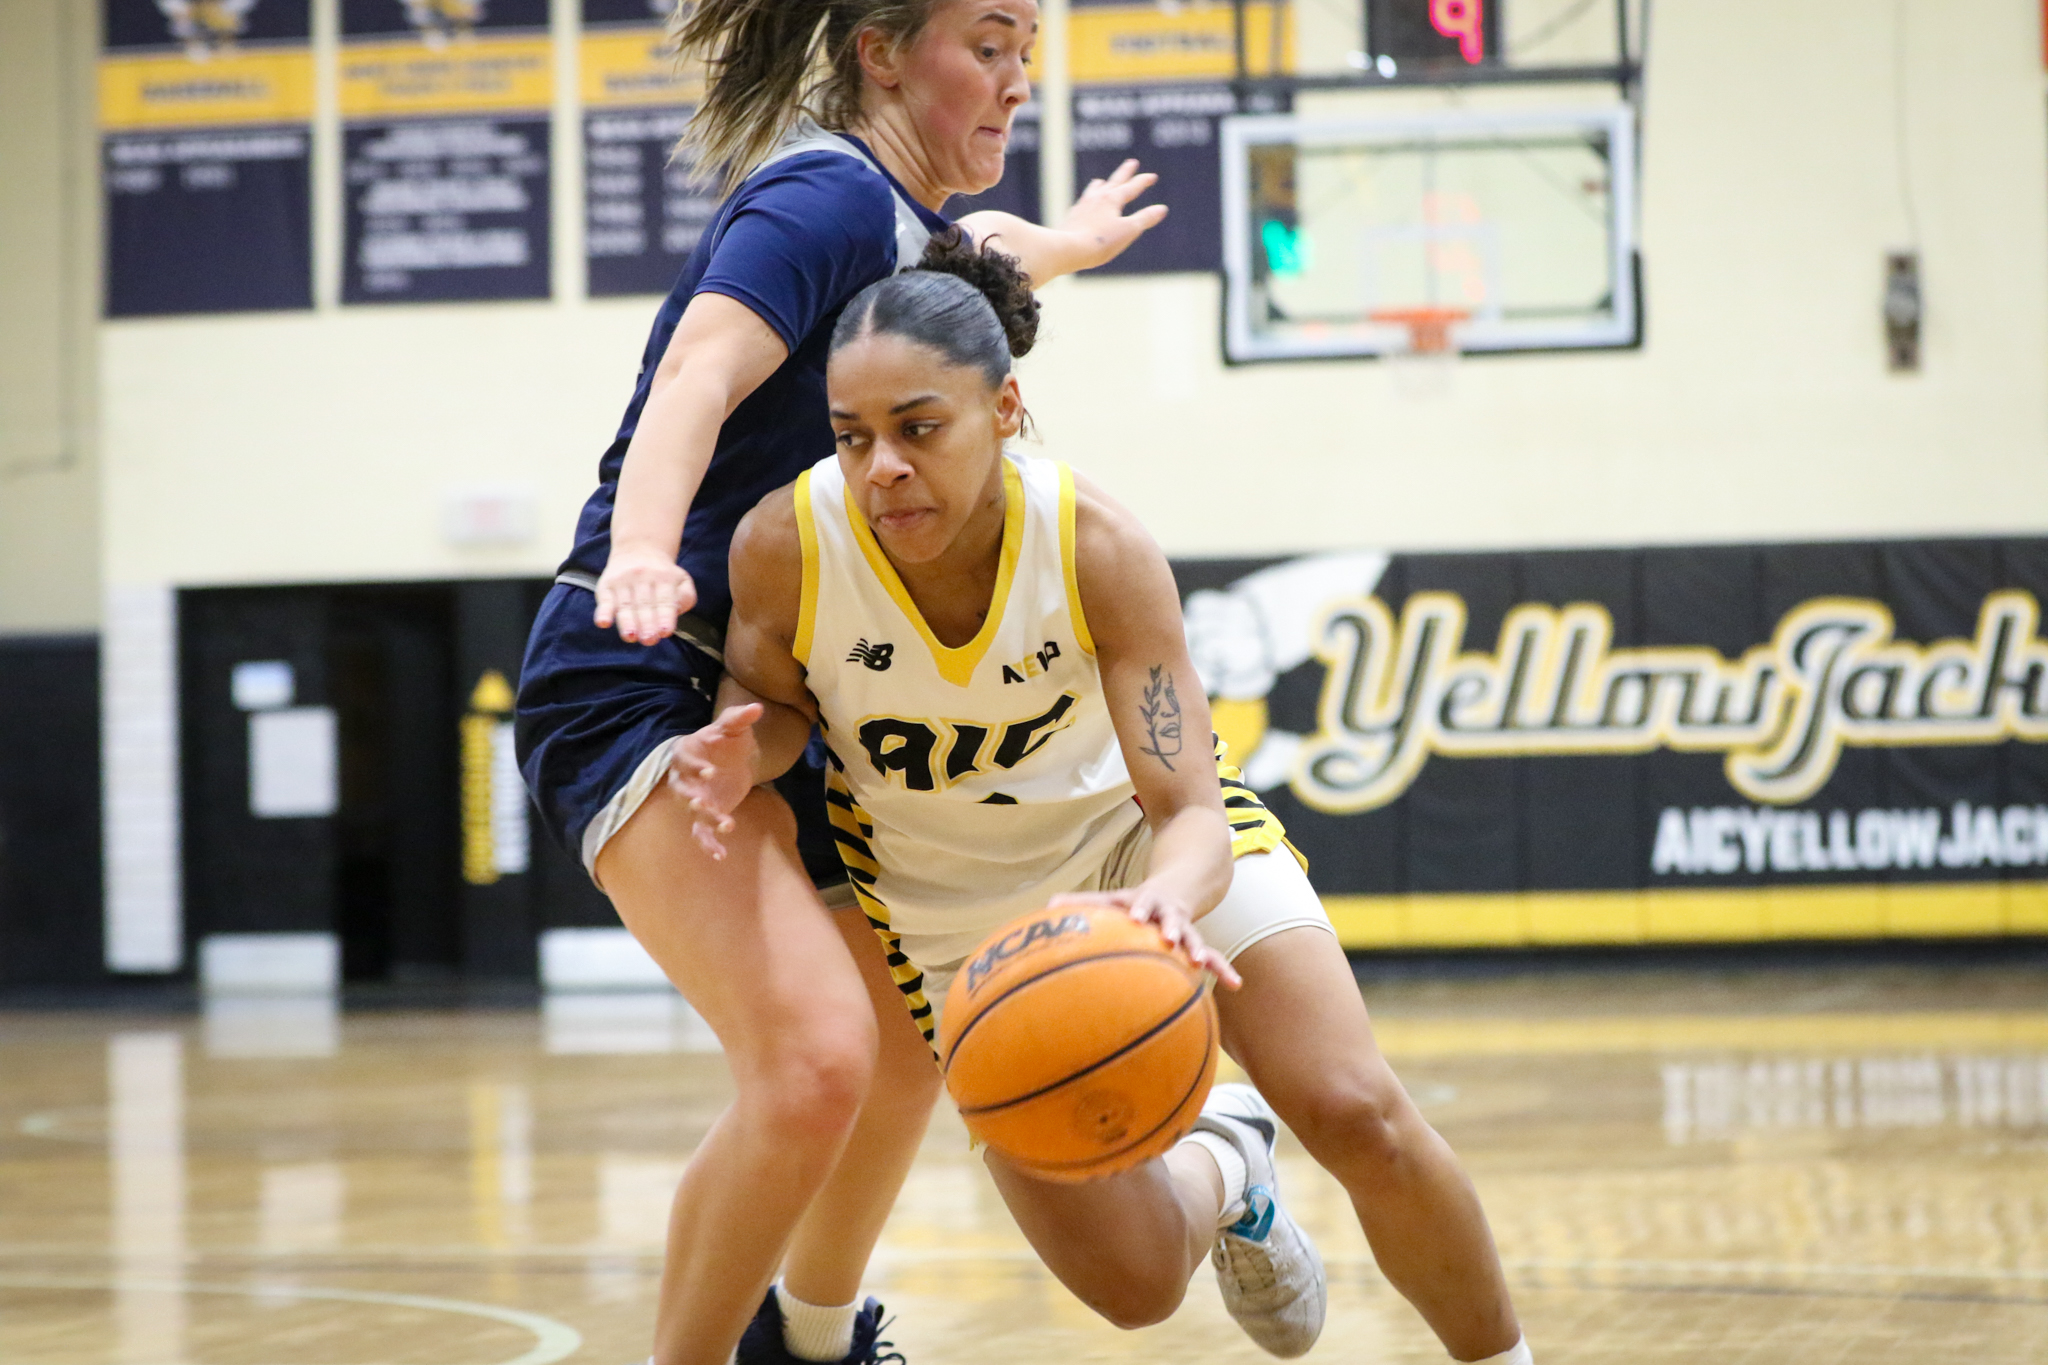 Women's Basketball advances in NE10 Tournament with victory against Saint Anselm